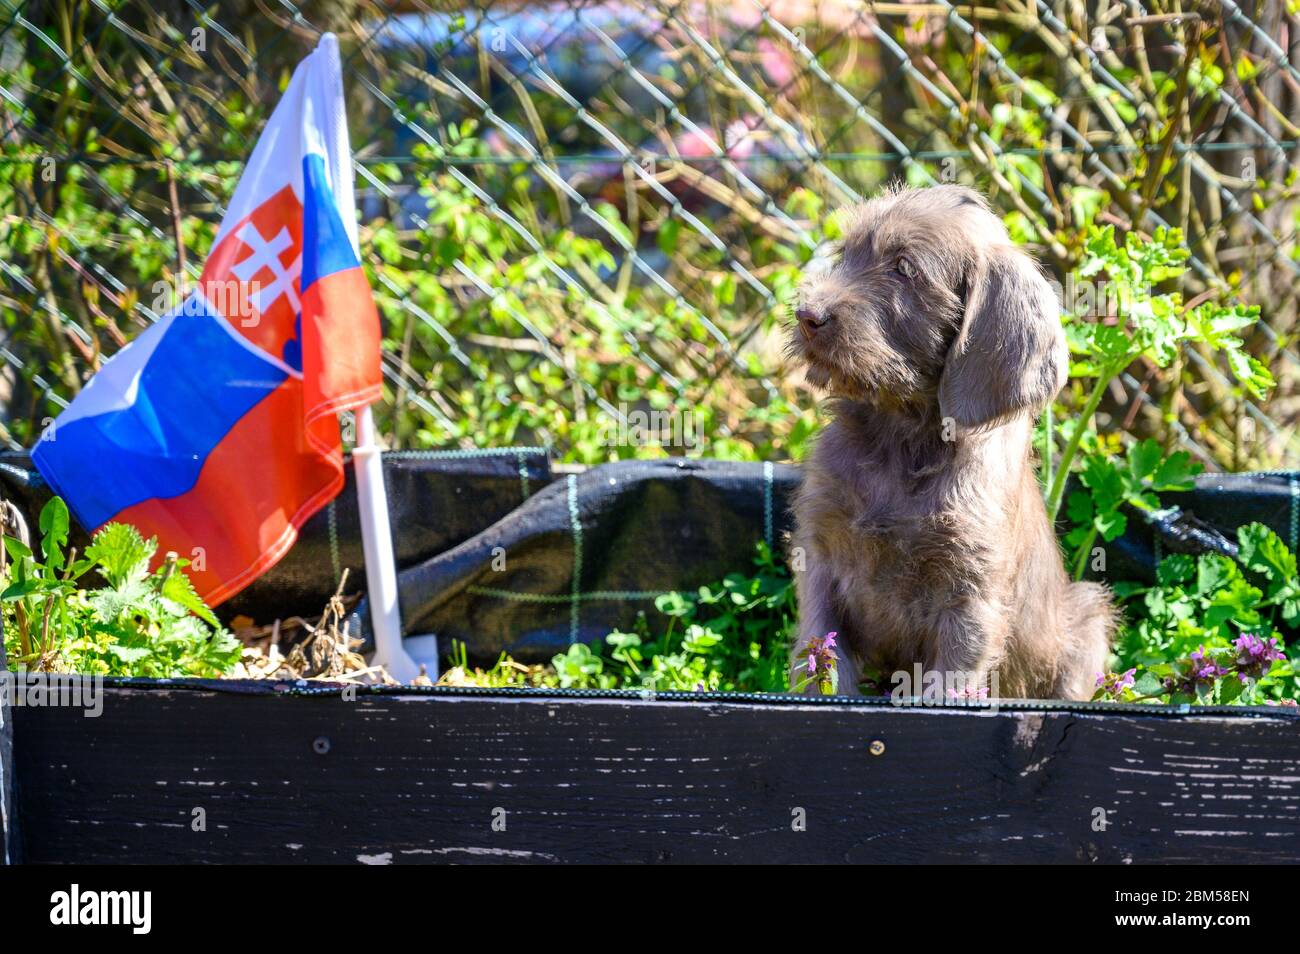 Grey-haired puppy with the Slovak flag. The puppy is of the breed: Slovak Rough-haired Pointer or Slovak Wirehaired Pointing Griffon. Stock Photo